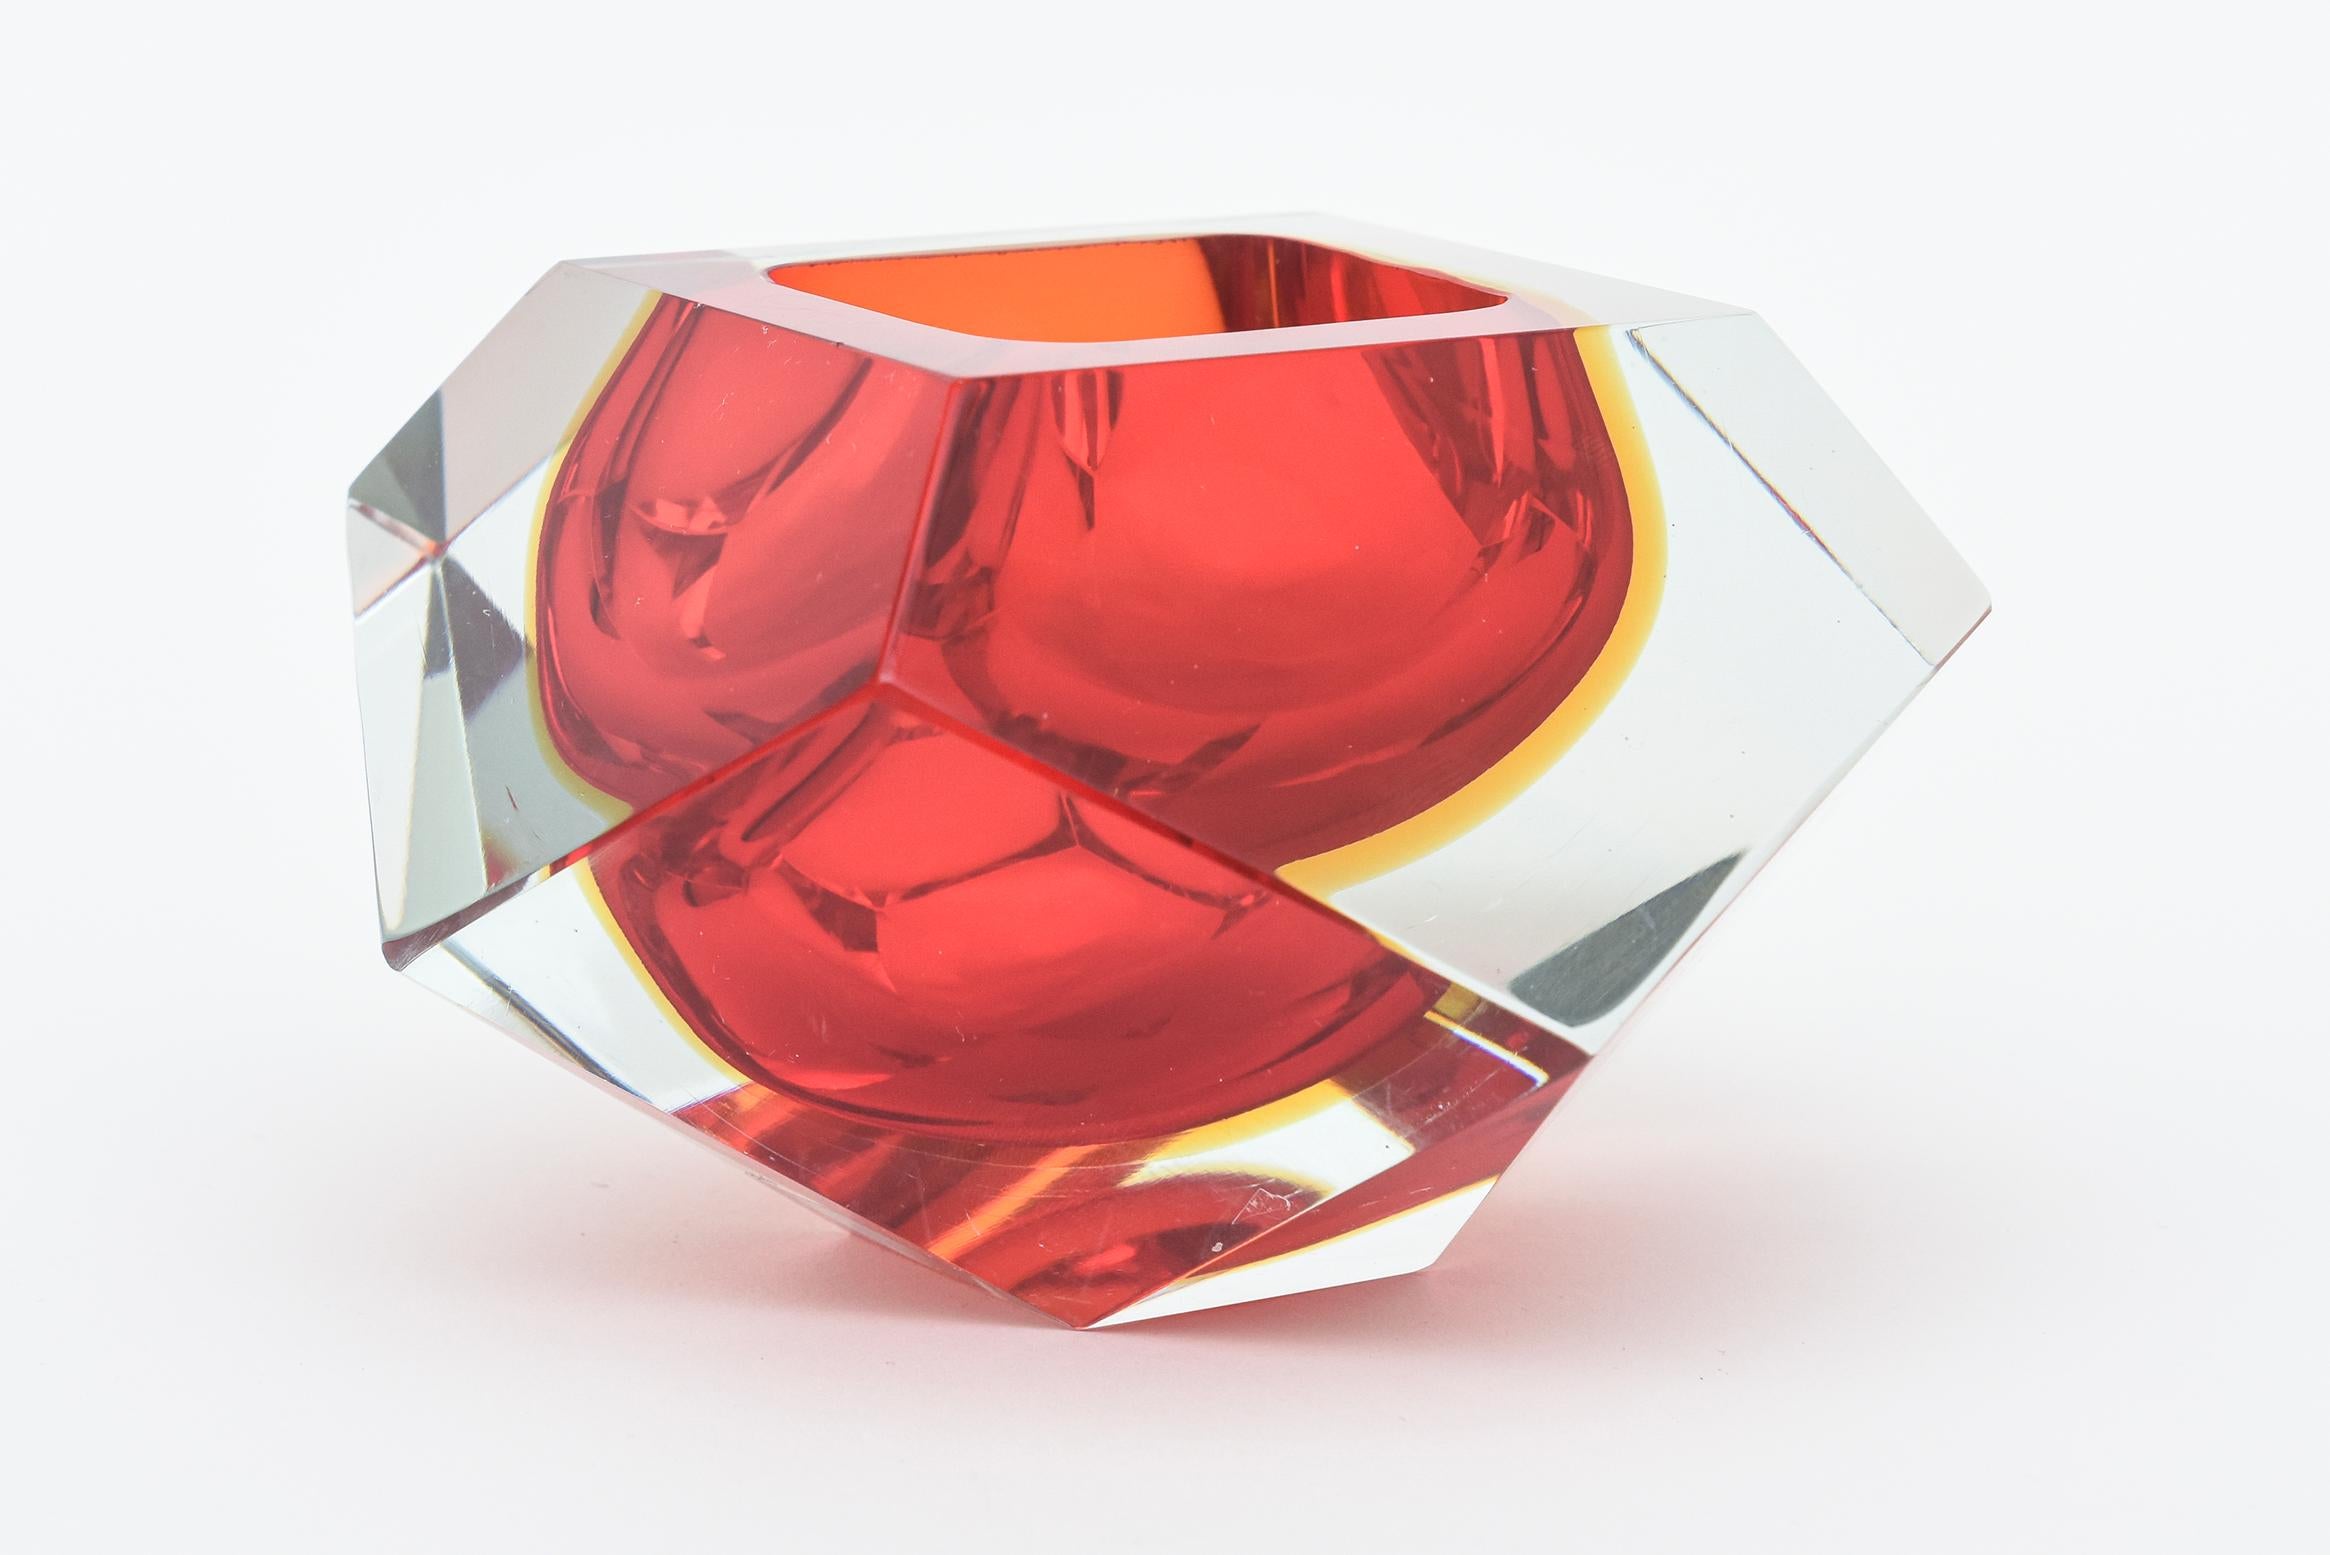 This lovely vintage hand blown italian glass bowl by Alessandro Mandruzzato is faceted sides and with a polished top. It is in the form of sommerso glass layered with colors of red to yellow to clear. From the 70's. The opening at the top for the